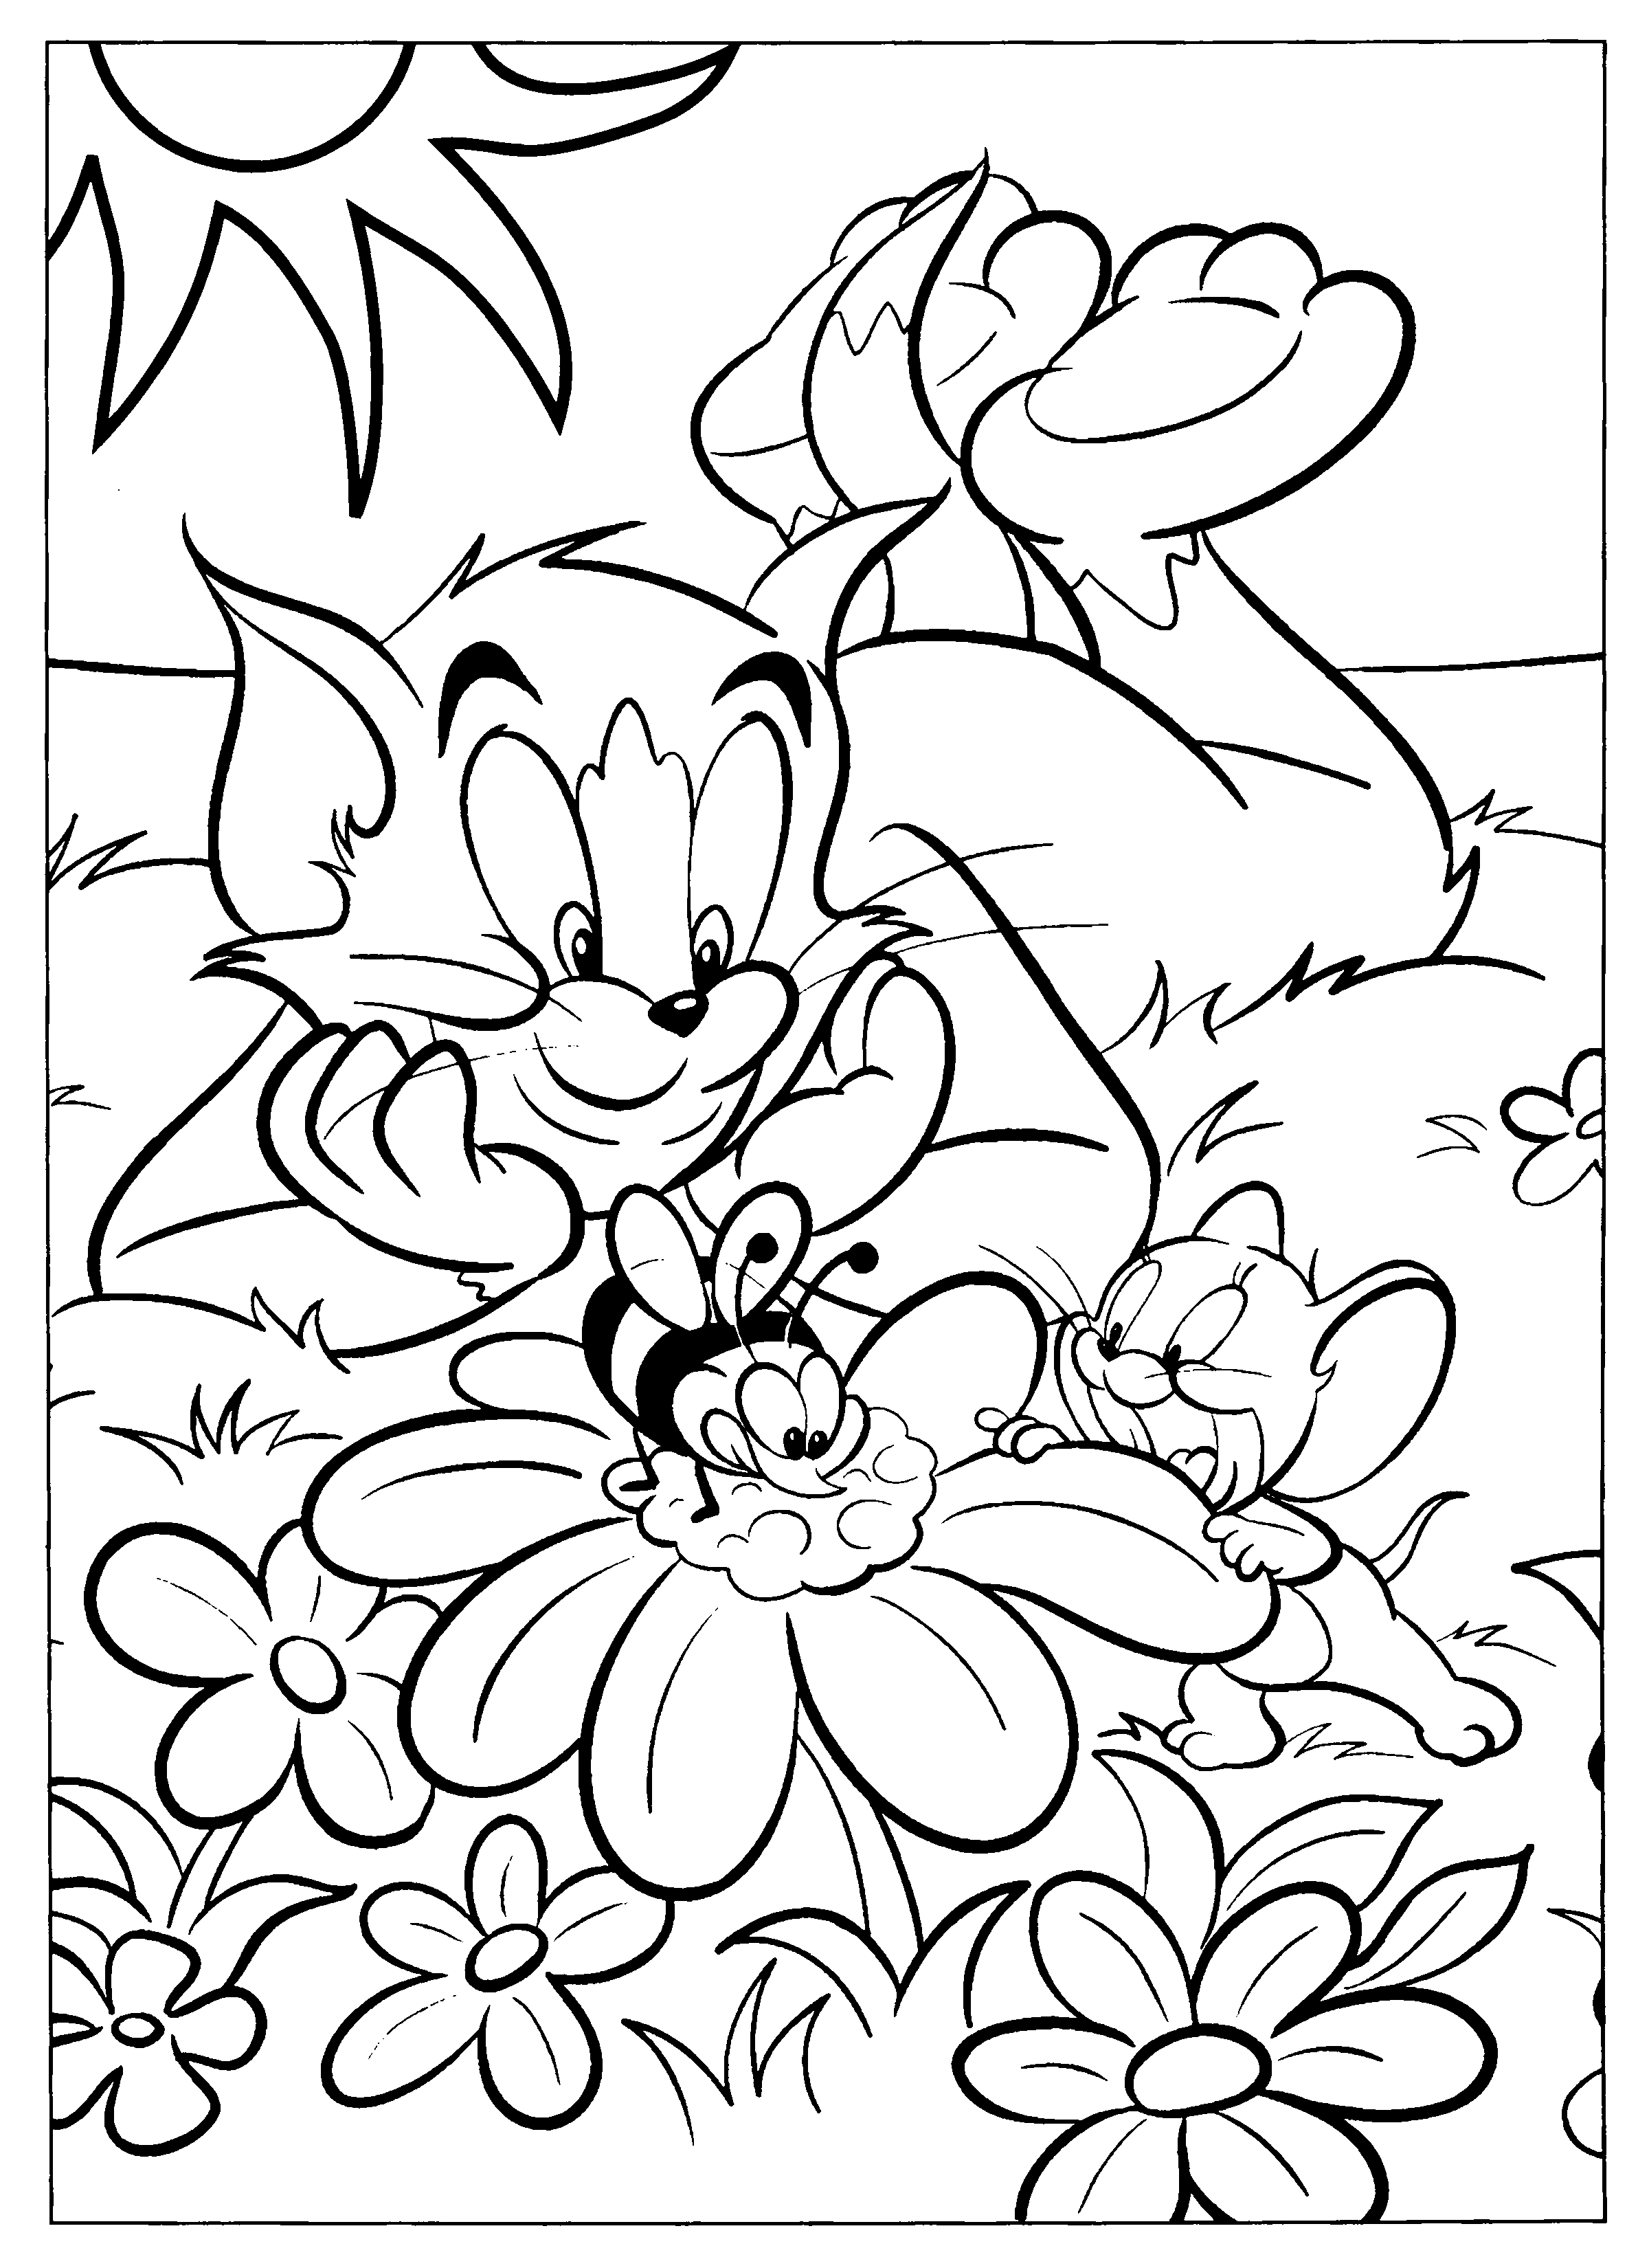 tom and jerry coloring page coloring pages tom and jerry page 2 printable coloring and jerry coloring page tom 